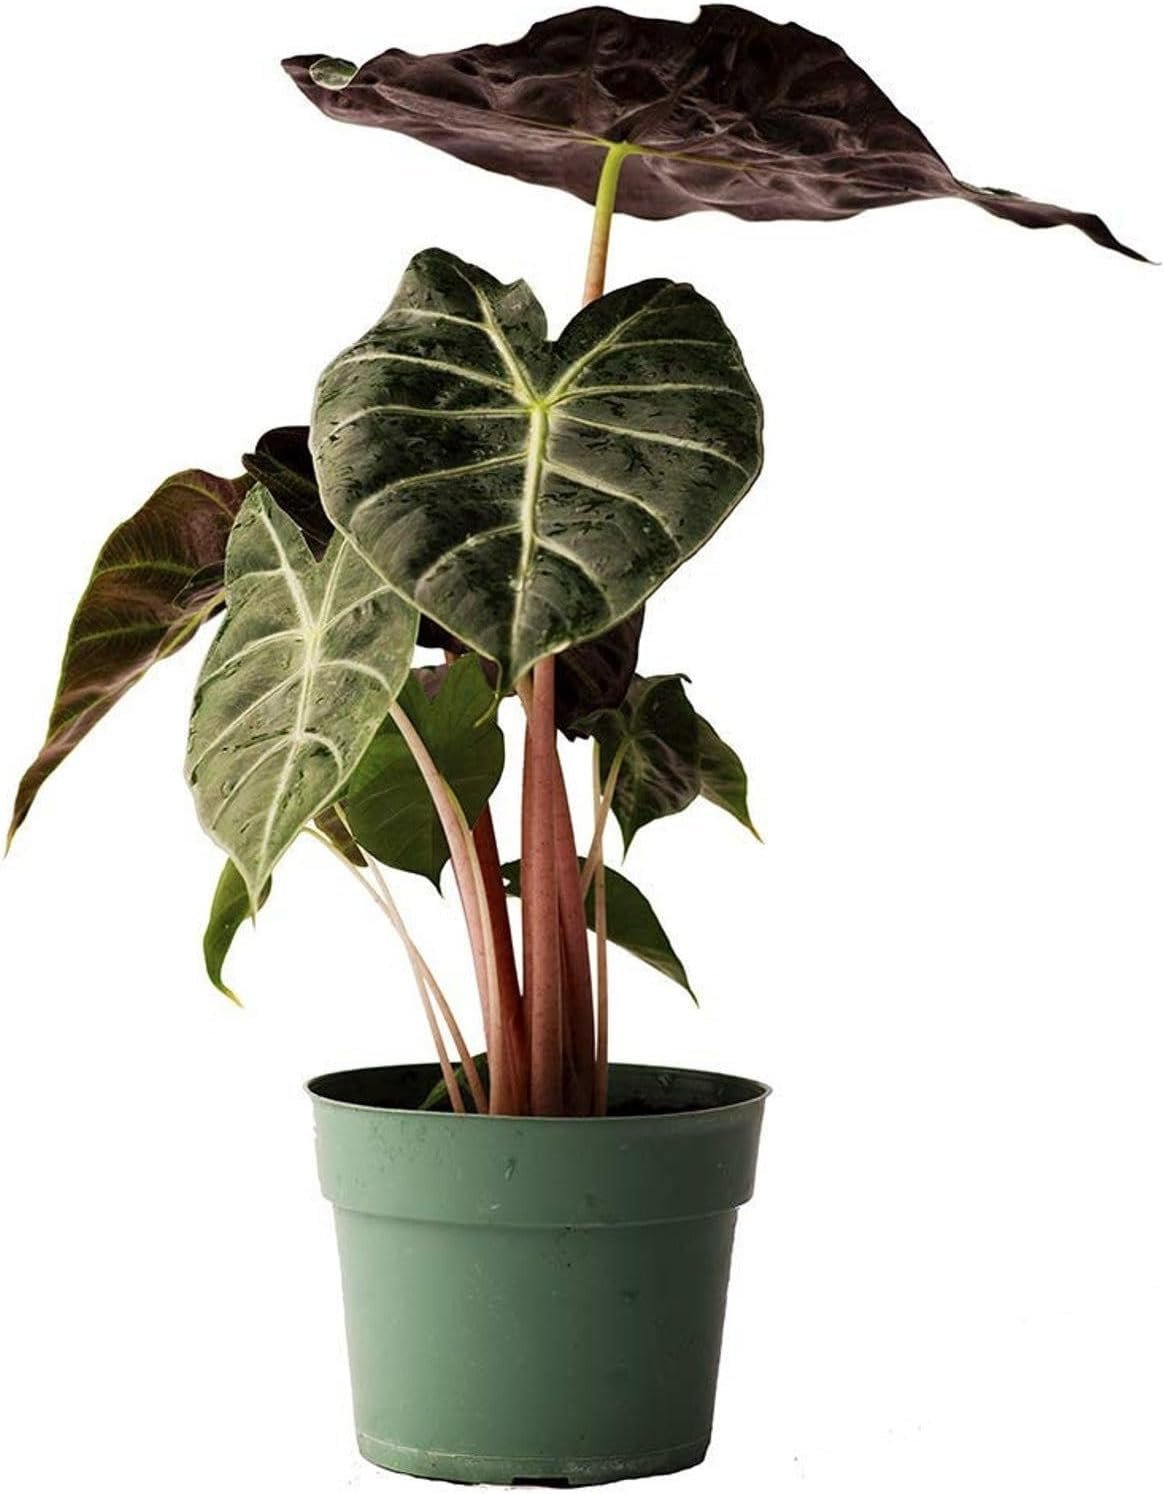 Morroco Alocasia - Live Plant in a 4 Inch Pot - Alocasia - Florist Quality Air Purifying Indoor Plant - Nature's Masterpiece in Your Home - image 3 of 5